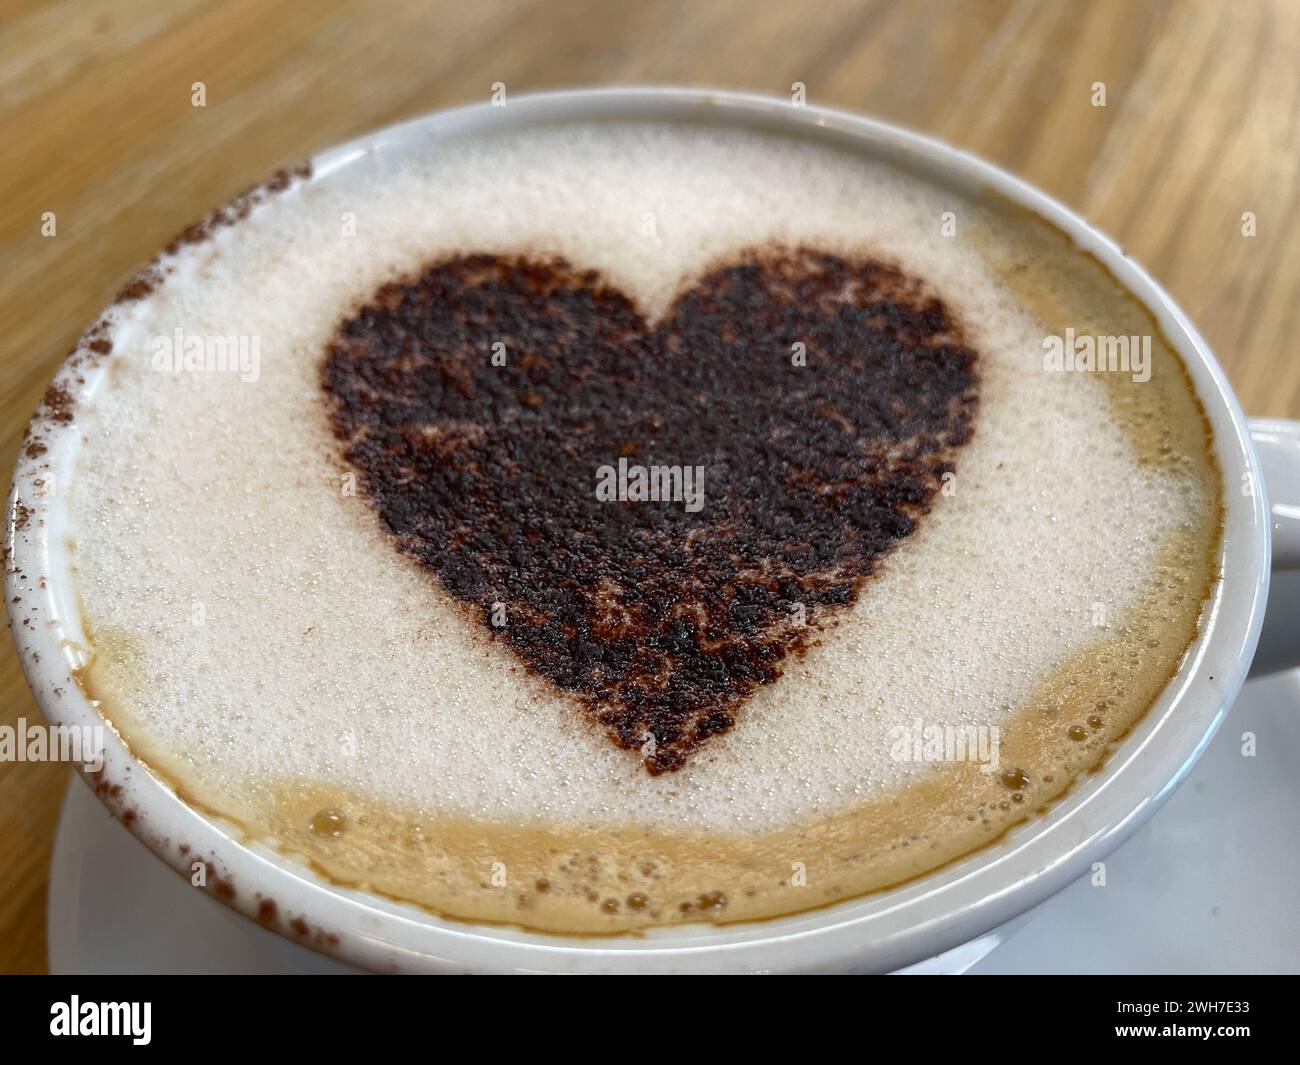 Viewed from top a cup of frothy coffee with a love heart made of chocolate sprinkles.Romatic.Valentine Day Stock Photo